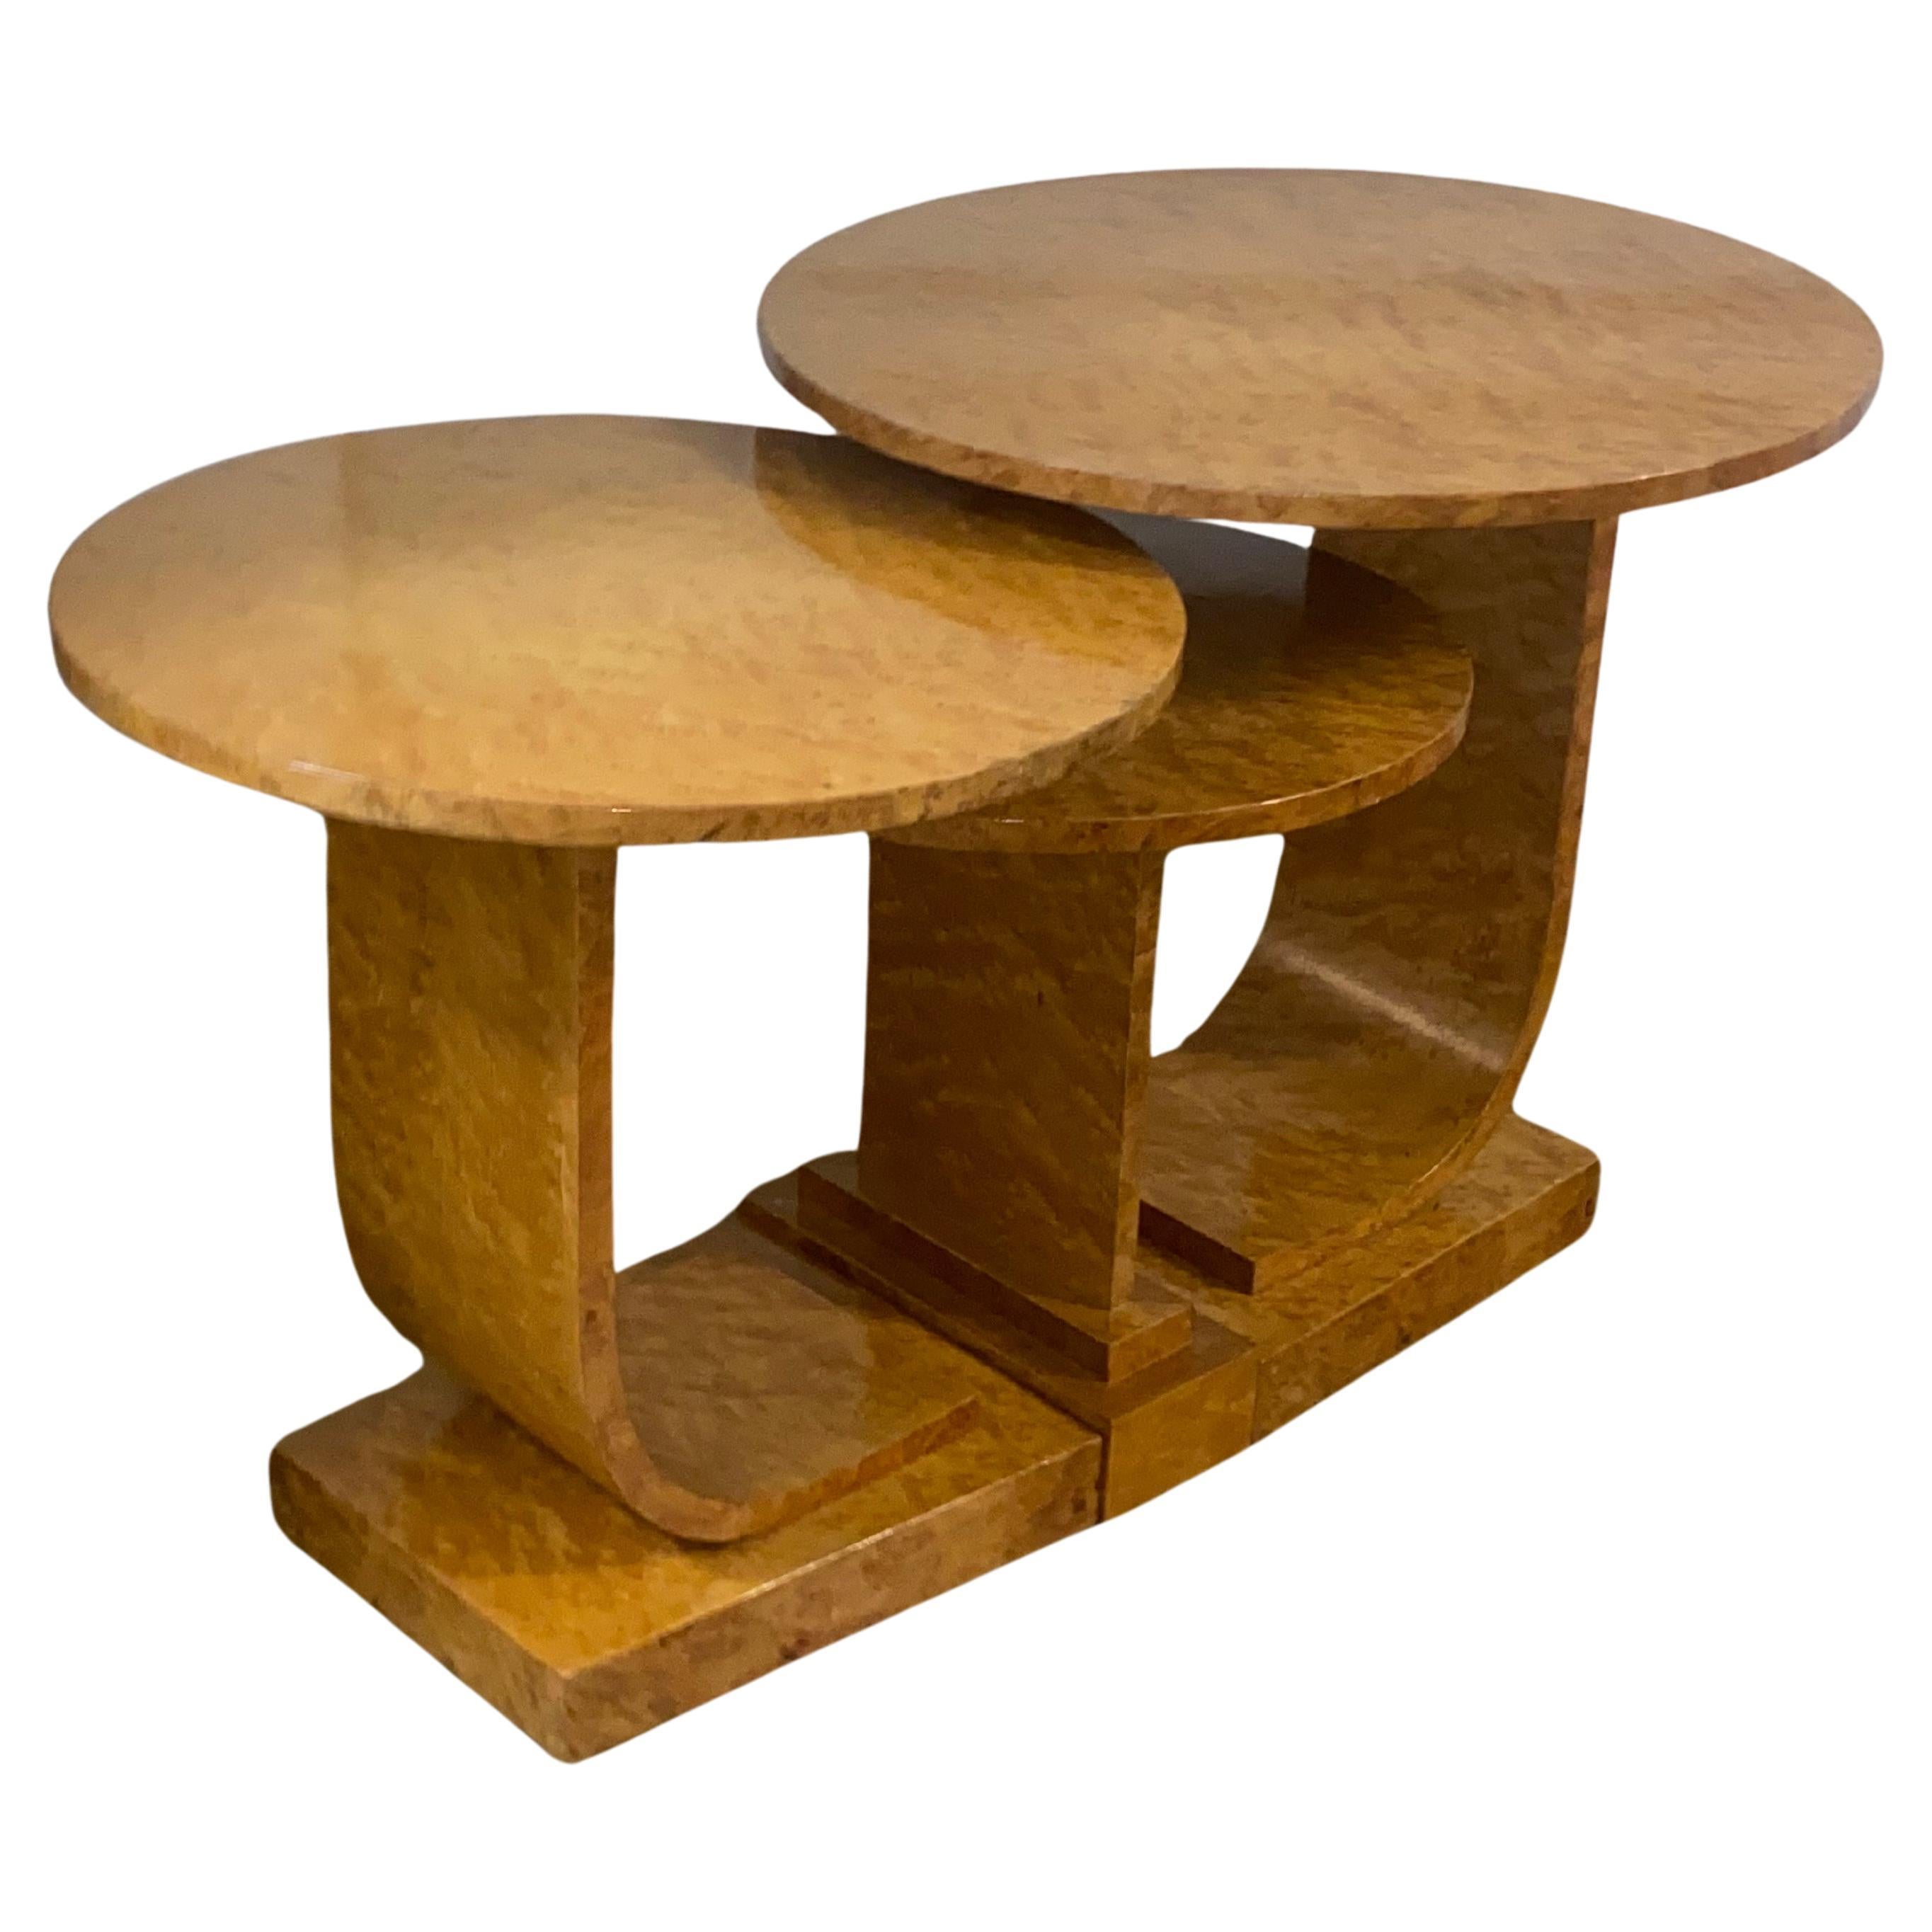 Mid-20th Century A Rare Art Deco Blonde Birds Eye Maple J Nest of Tables by Epstein Circa 1930 For Sale